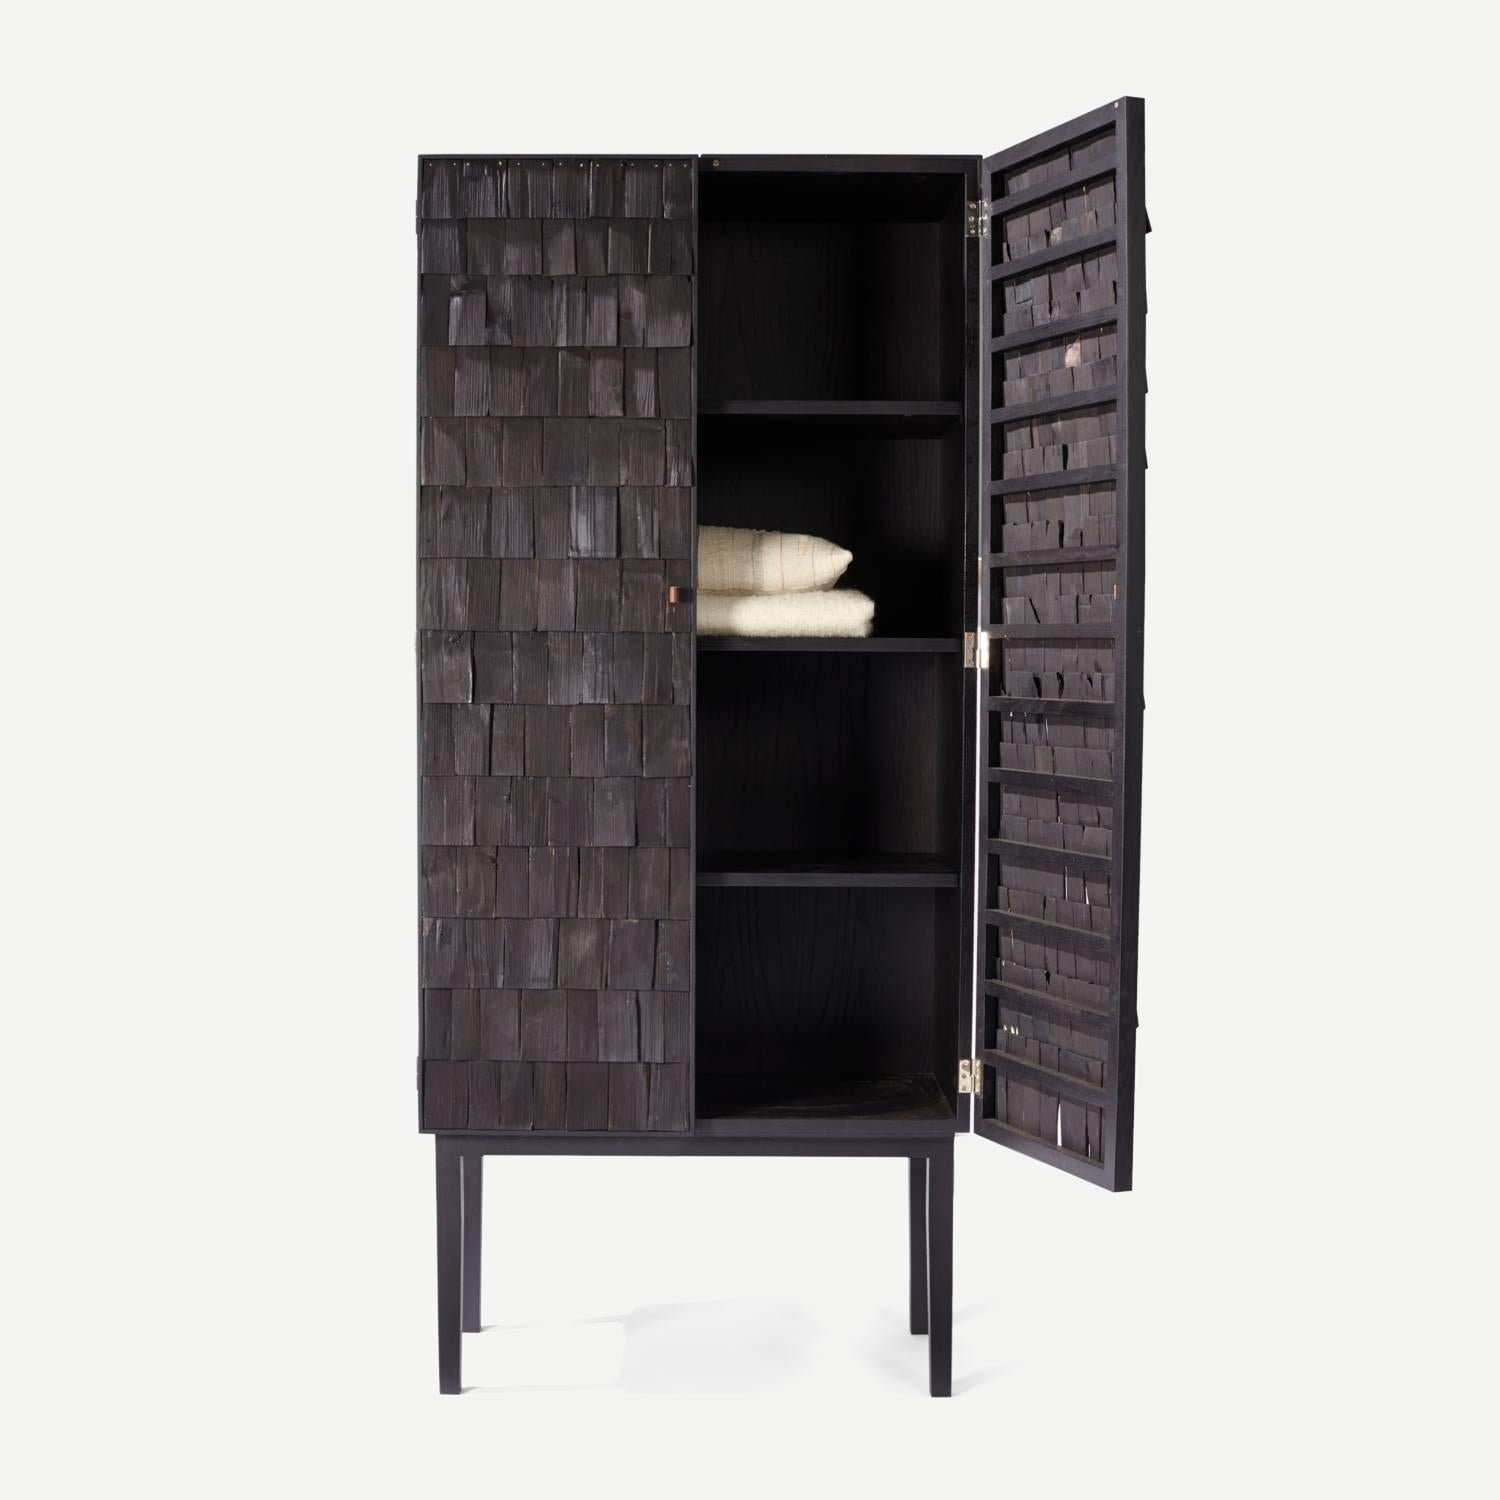 Scorched “Shake” cabinet by Sebastian Cos and benchmark furniture. A contemporary cabinet constructed with blackened shakes in chestnut and ash timber. Blackened exclusively for the new craftsmen, each shake a type of shingle commonly used in Japan